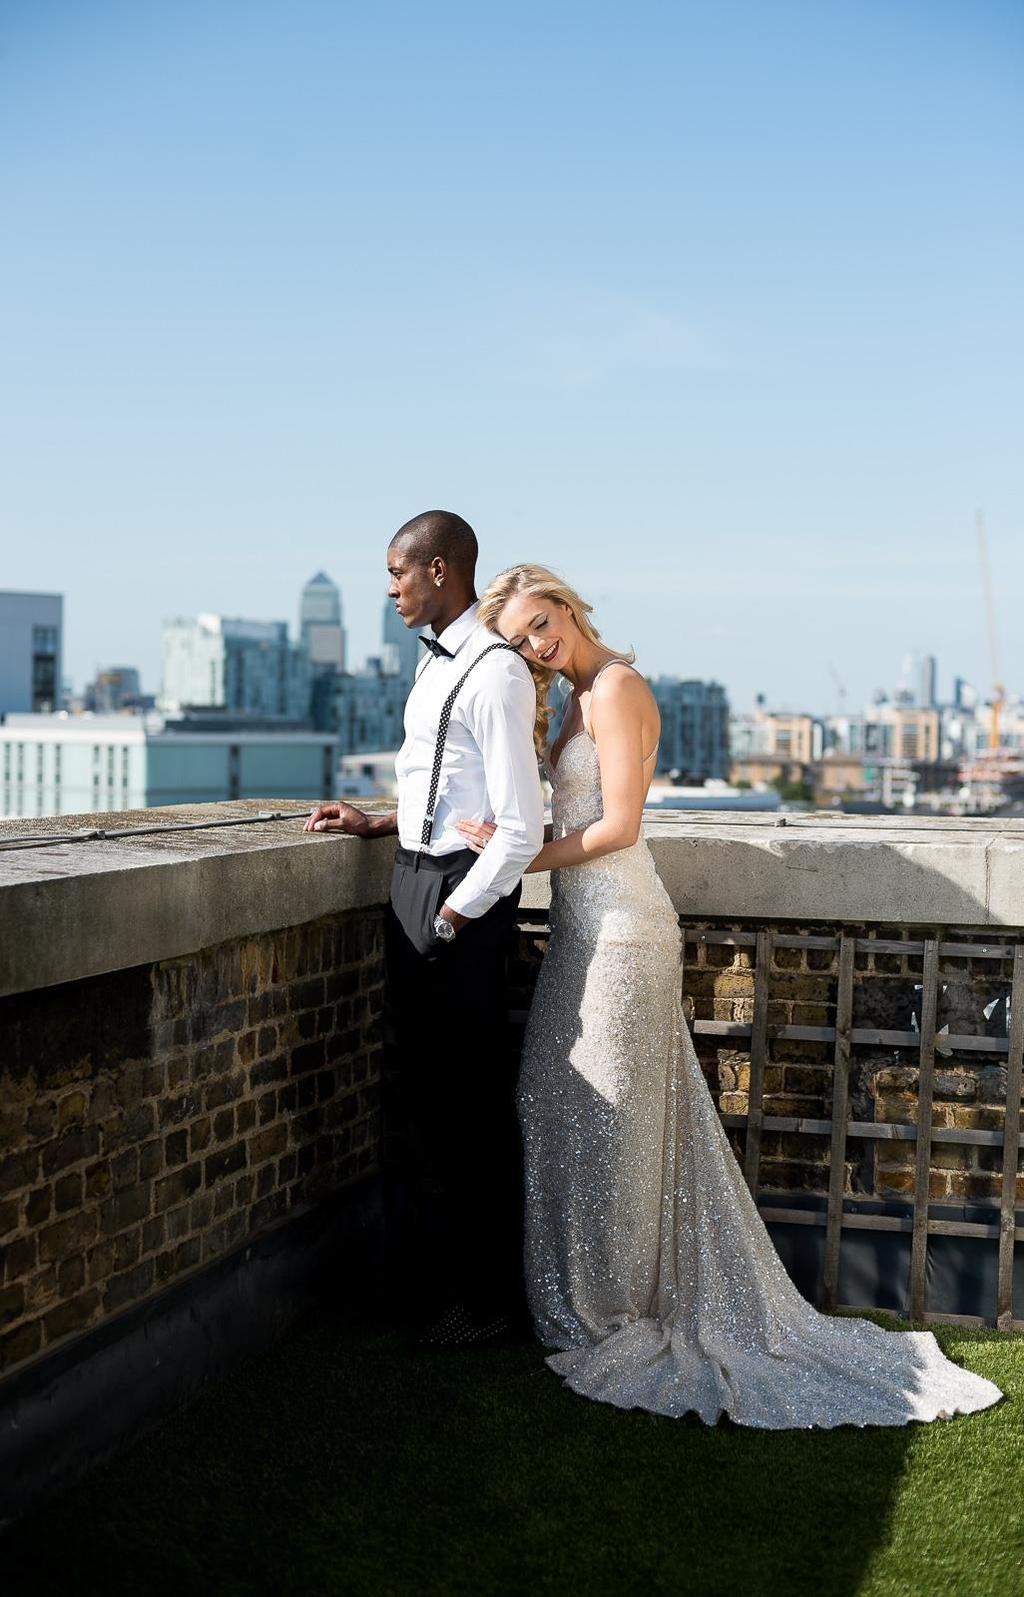 Our Wedding Promise At the Doubletree by Hilton London Greenwich, we recognise that every celebration is different and are committed to supporting you in the planning and organisation of every